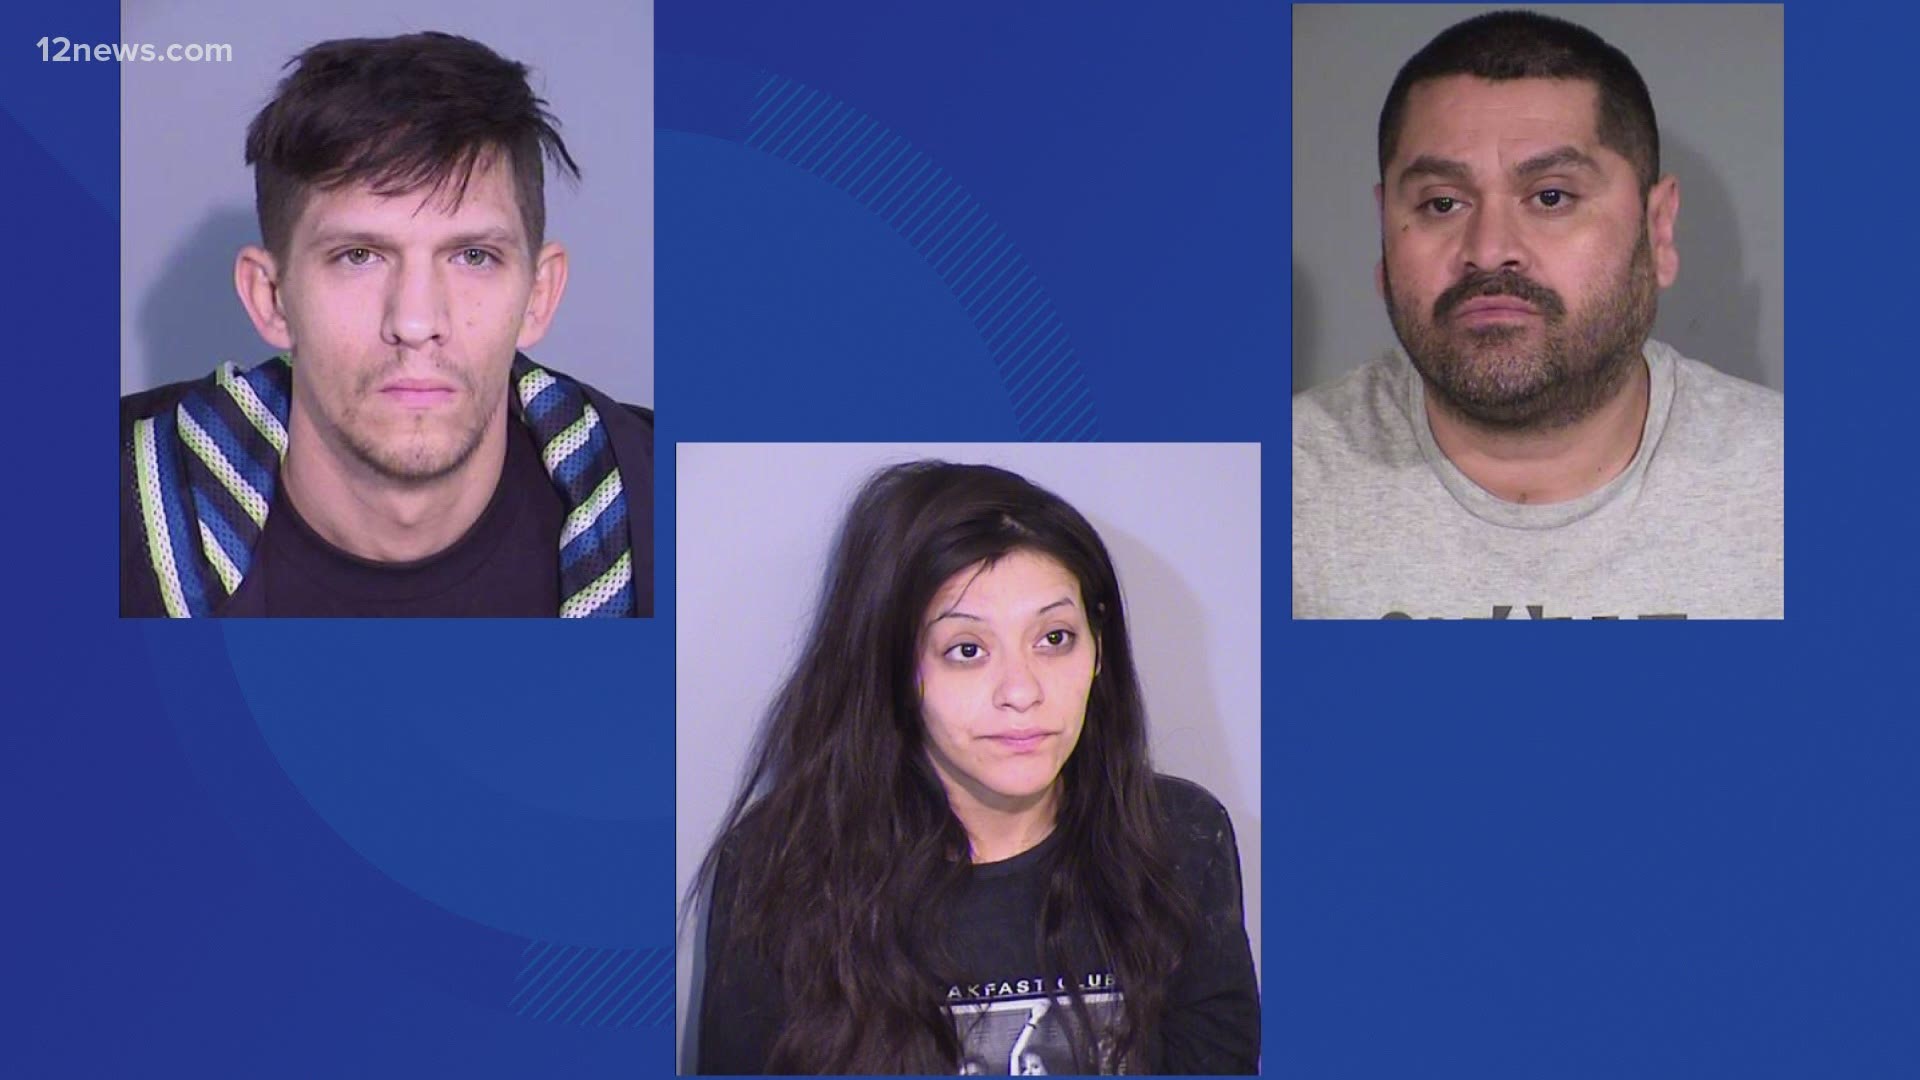 The suspects impersonated a cop car, pulled them over and threatened them for their ATM numbers. Three suspects were caught and are facing a number of charges.